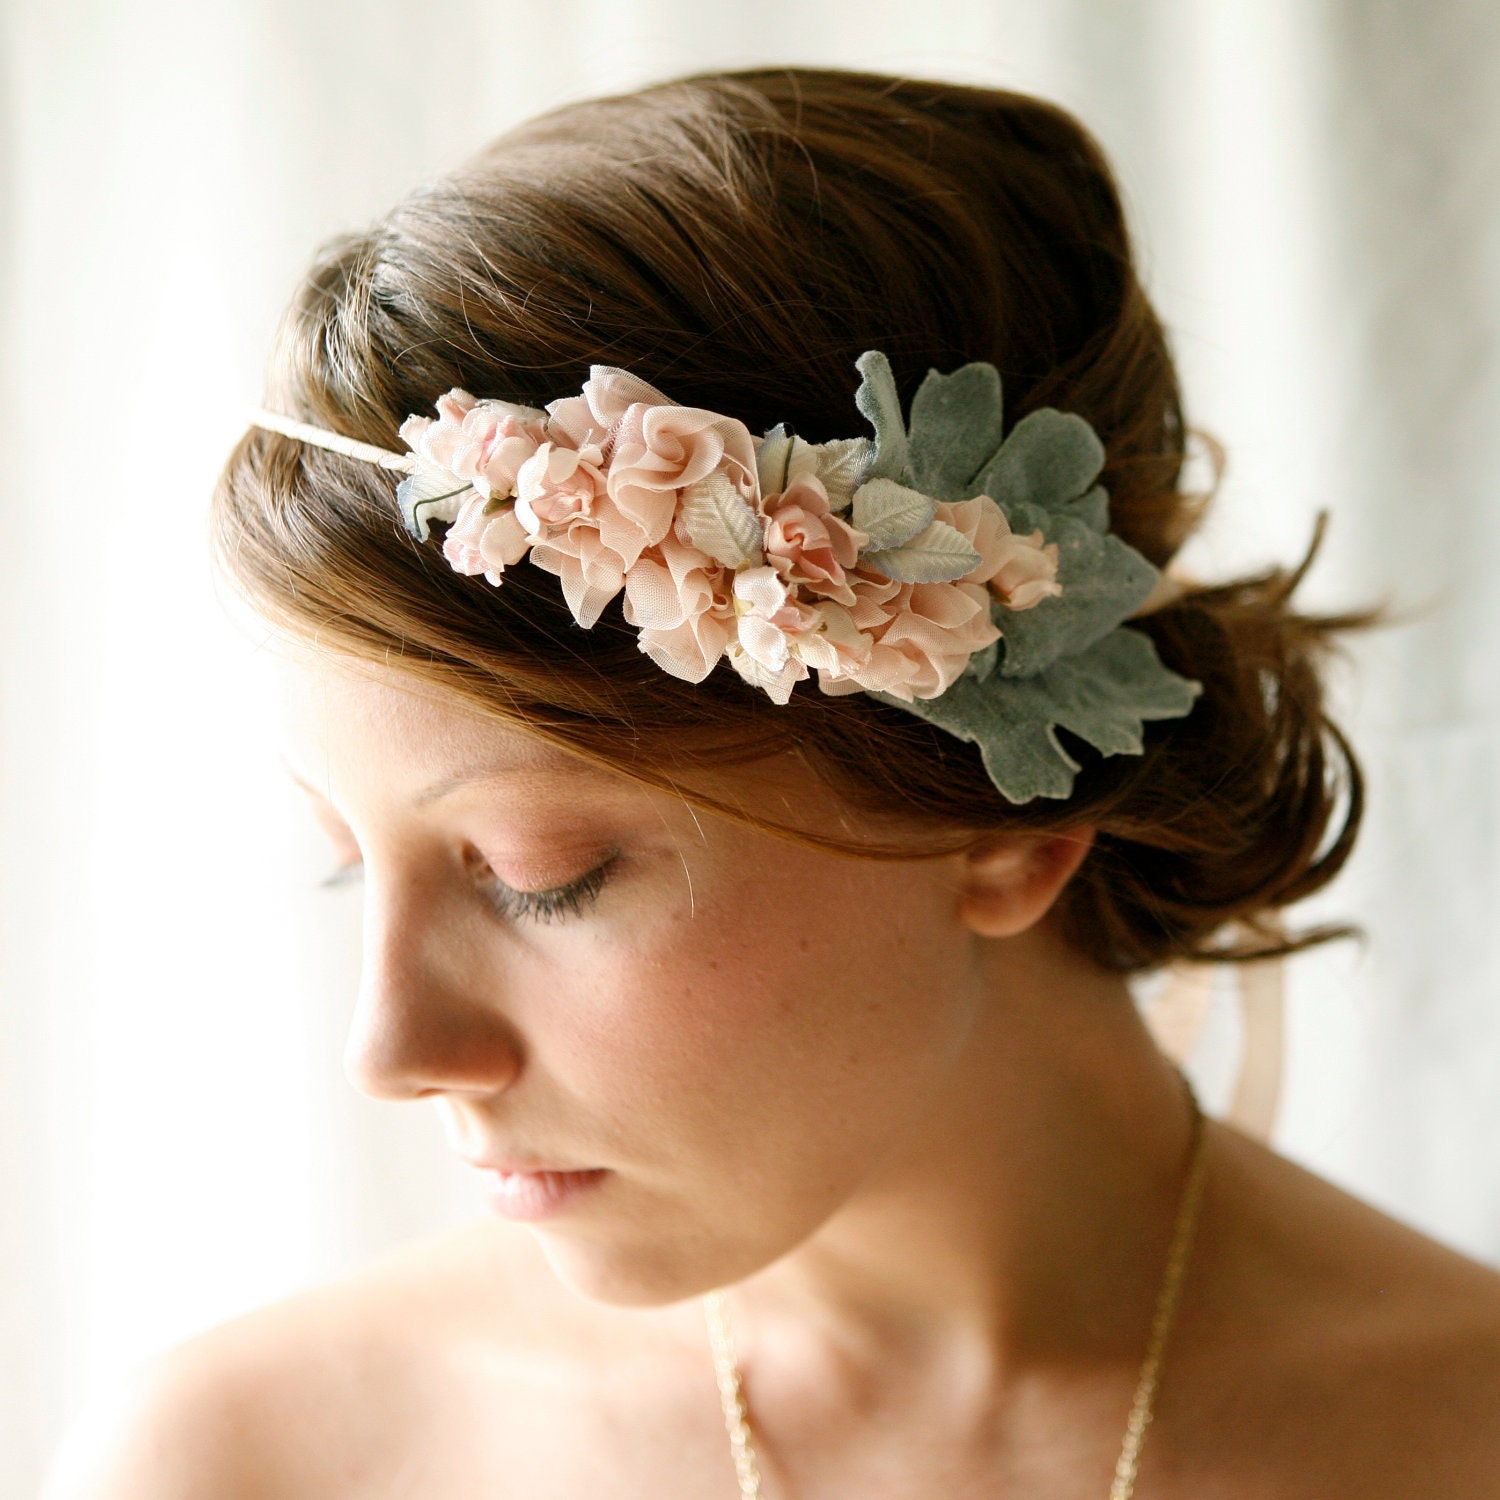 Vintage Inspired Crowns, Fascinators, and Combs by Which Goose